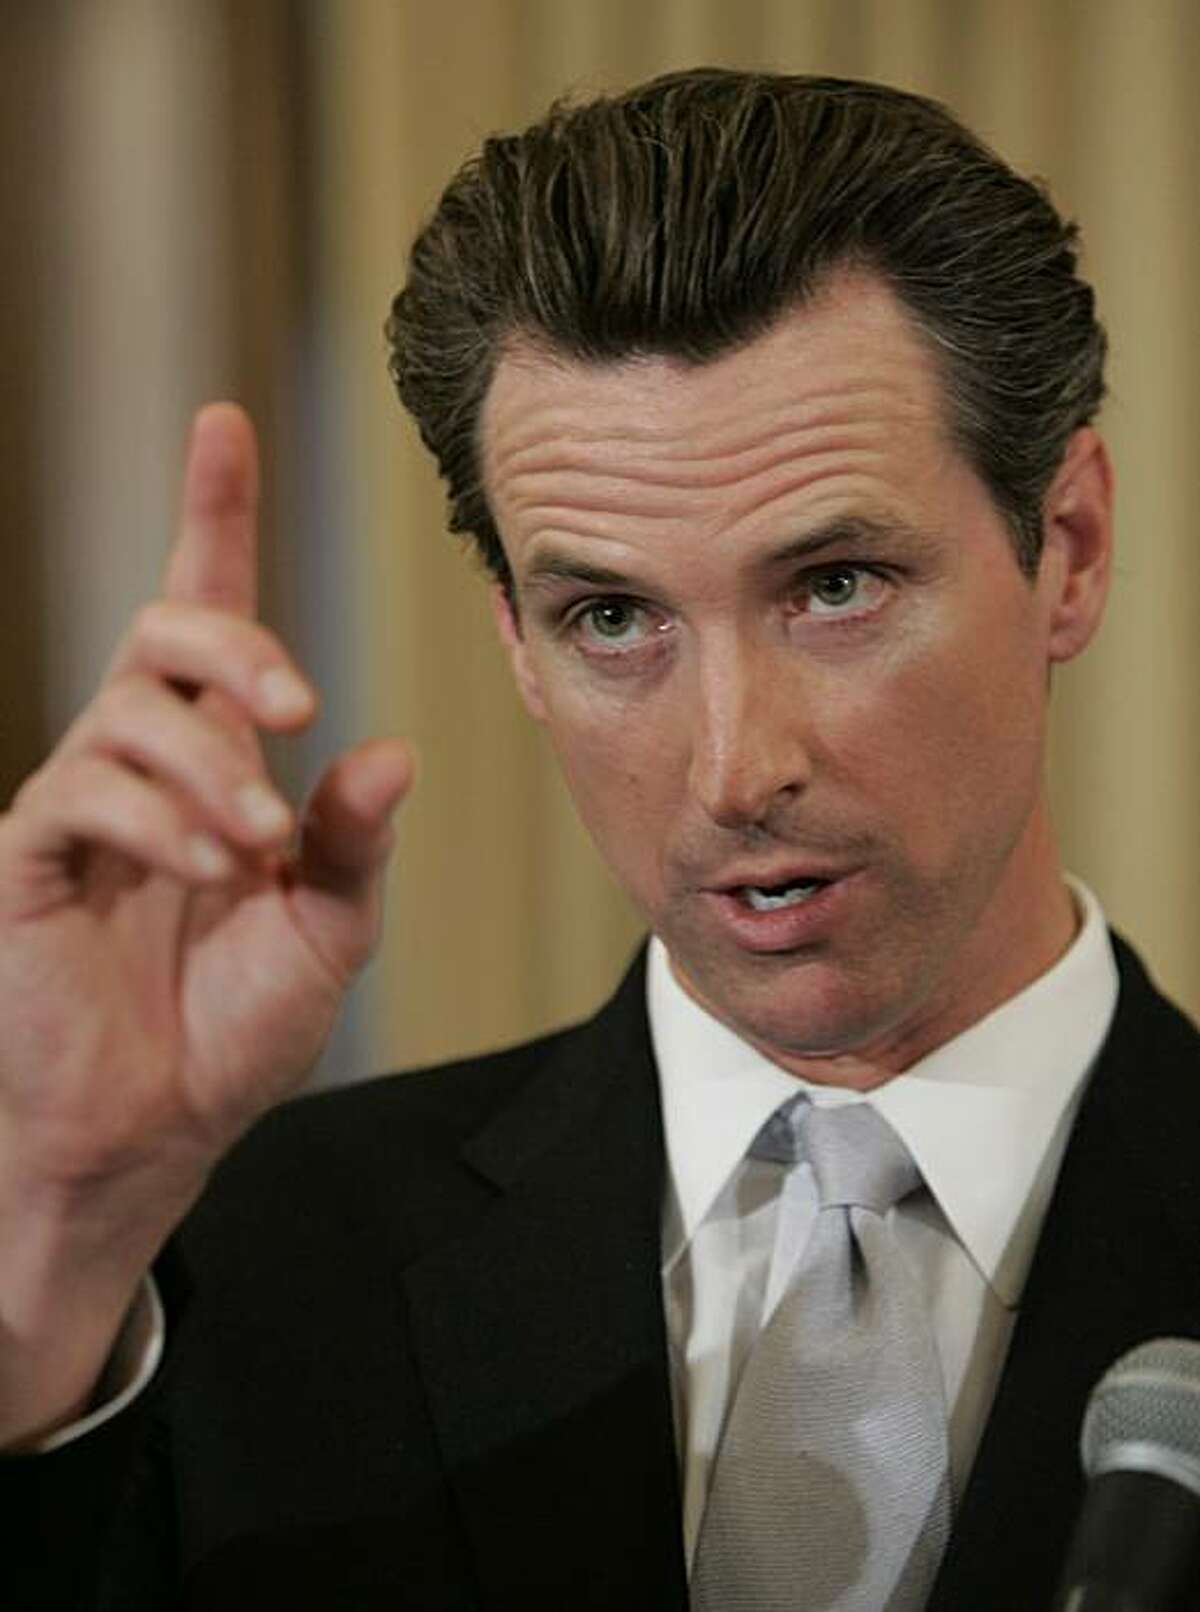 FILE - This Nov. 5, 2008 file photo shows San Francisco Mayor Gavin Newsom at a news conference on Proposition 8 at City Hall in San Francisco. Gavin Newsom, the San Francisco mayor best-known for opening City Hall to same-sex weddings, was once thought to be too liberal even for California. But his decisive win as the state's next second-in-command is helping to keep his political options open.